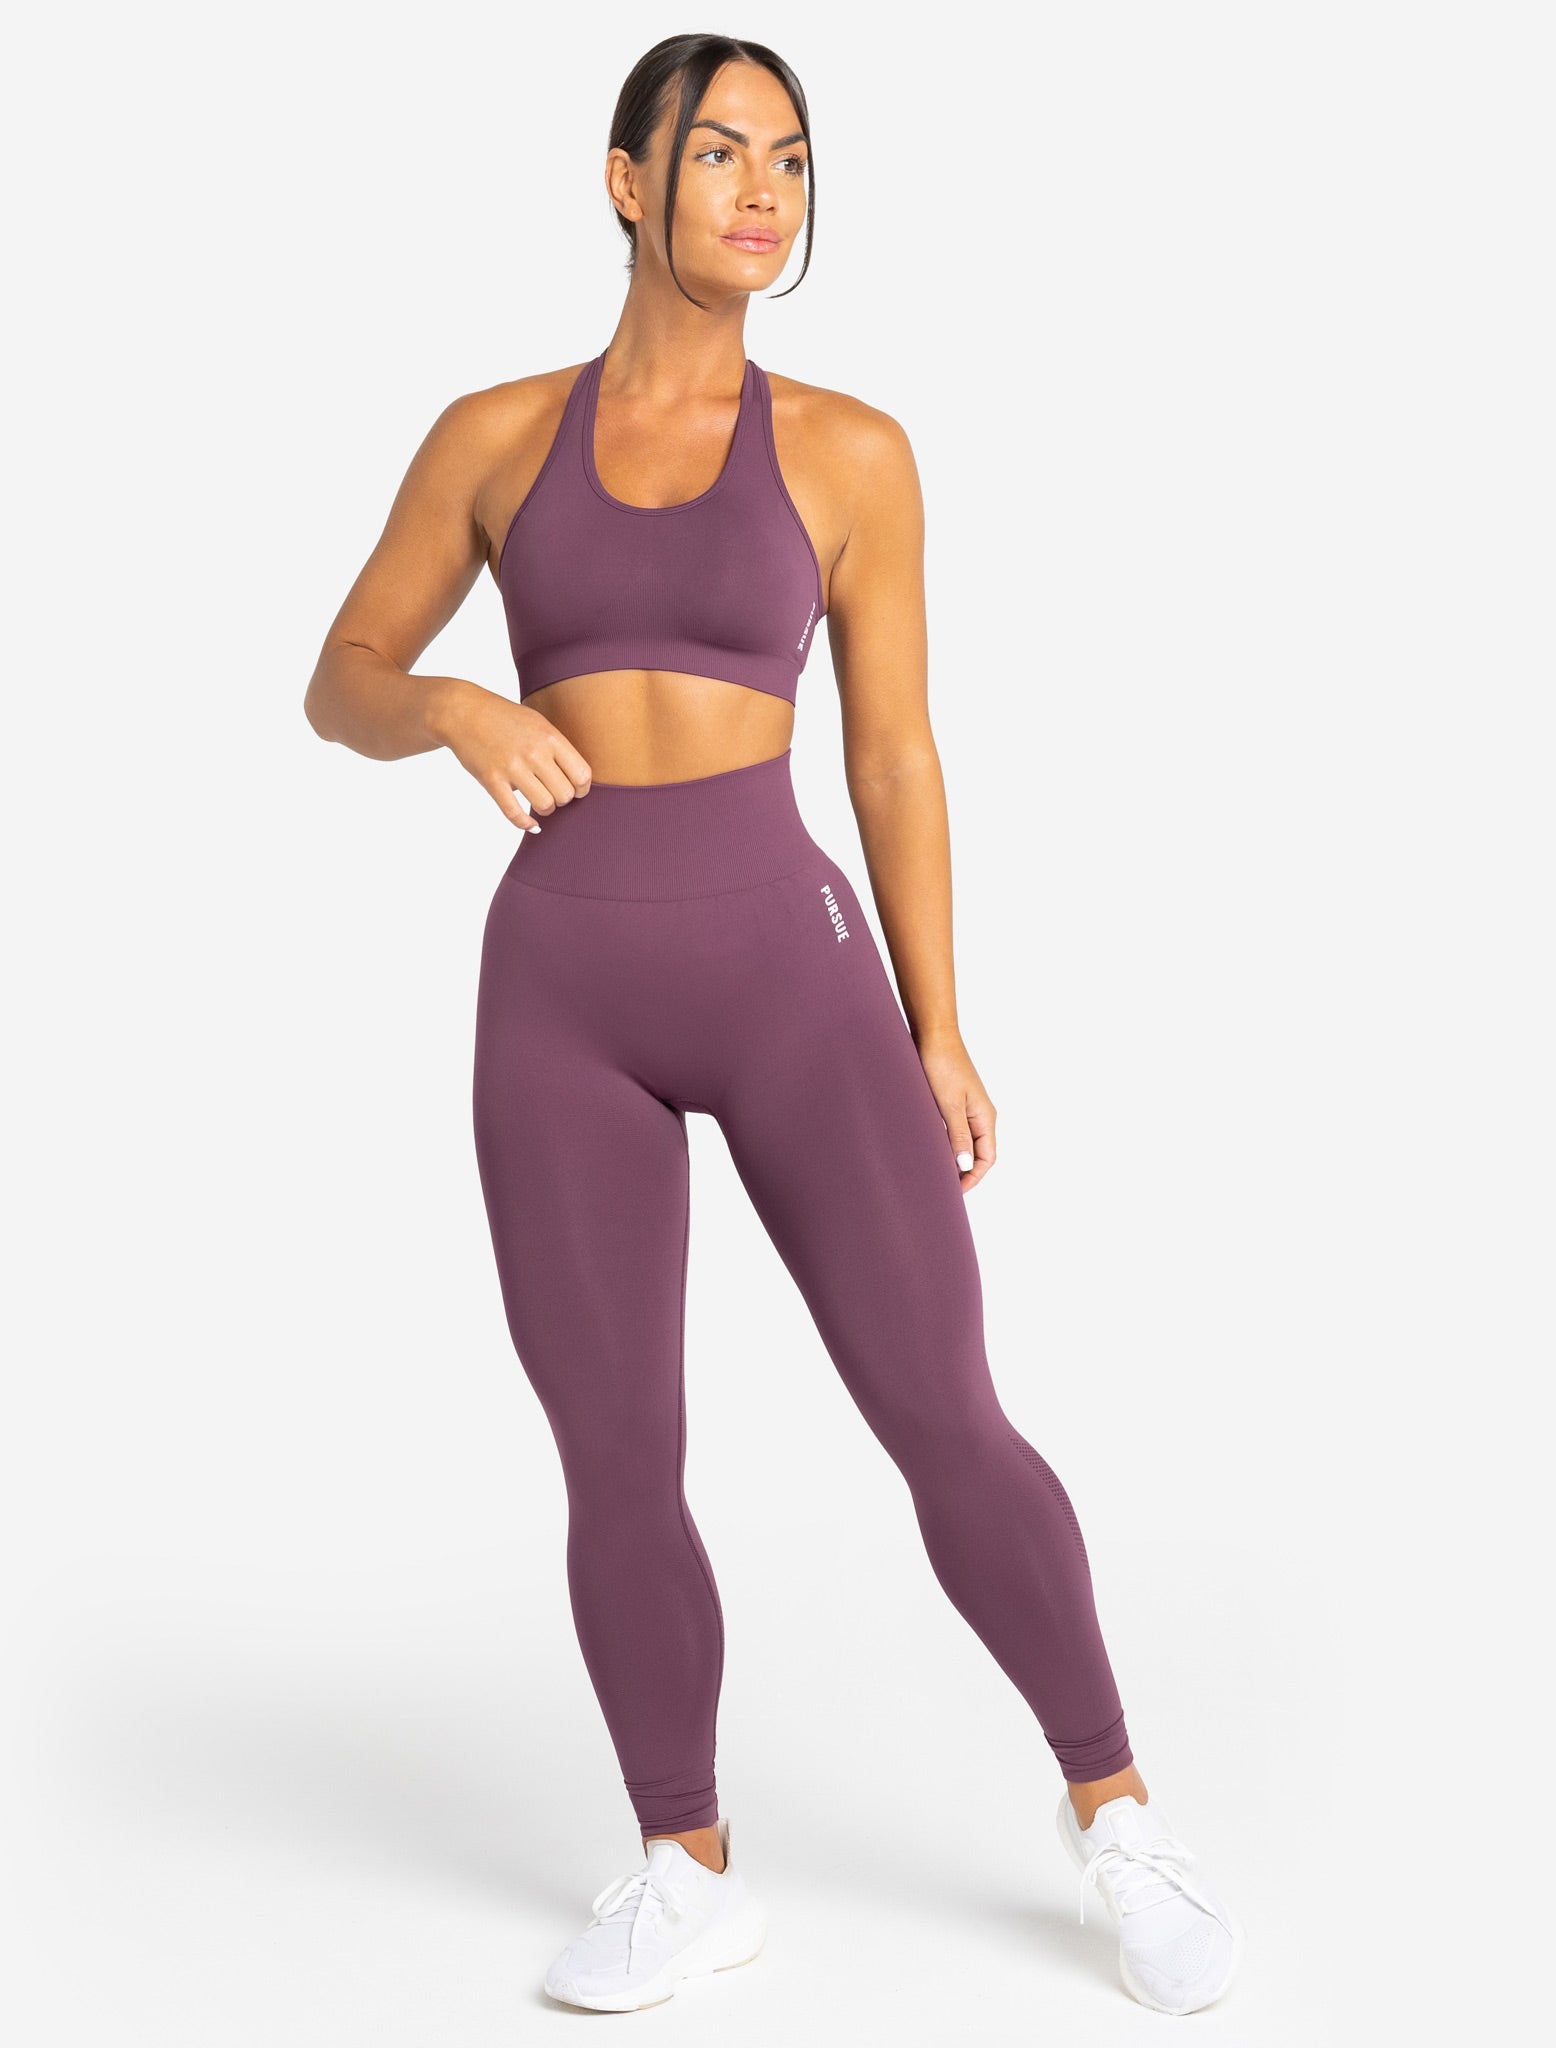 Pursue Fitness Move Seamless Review